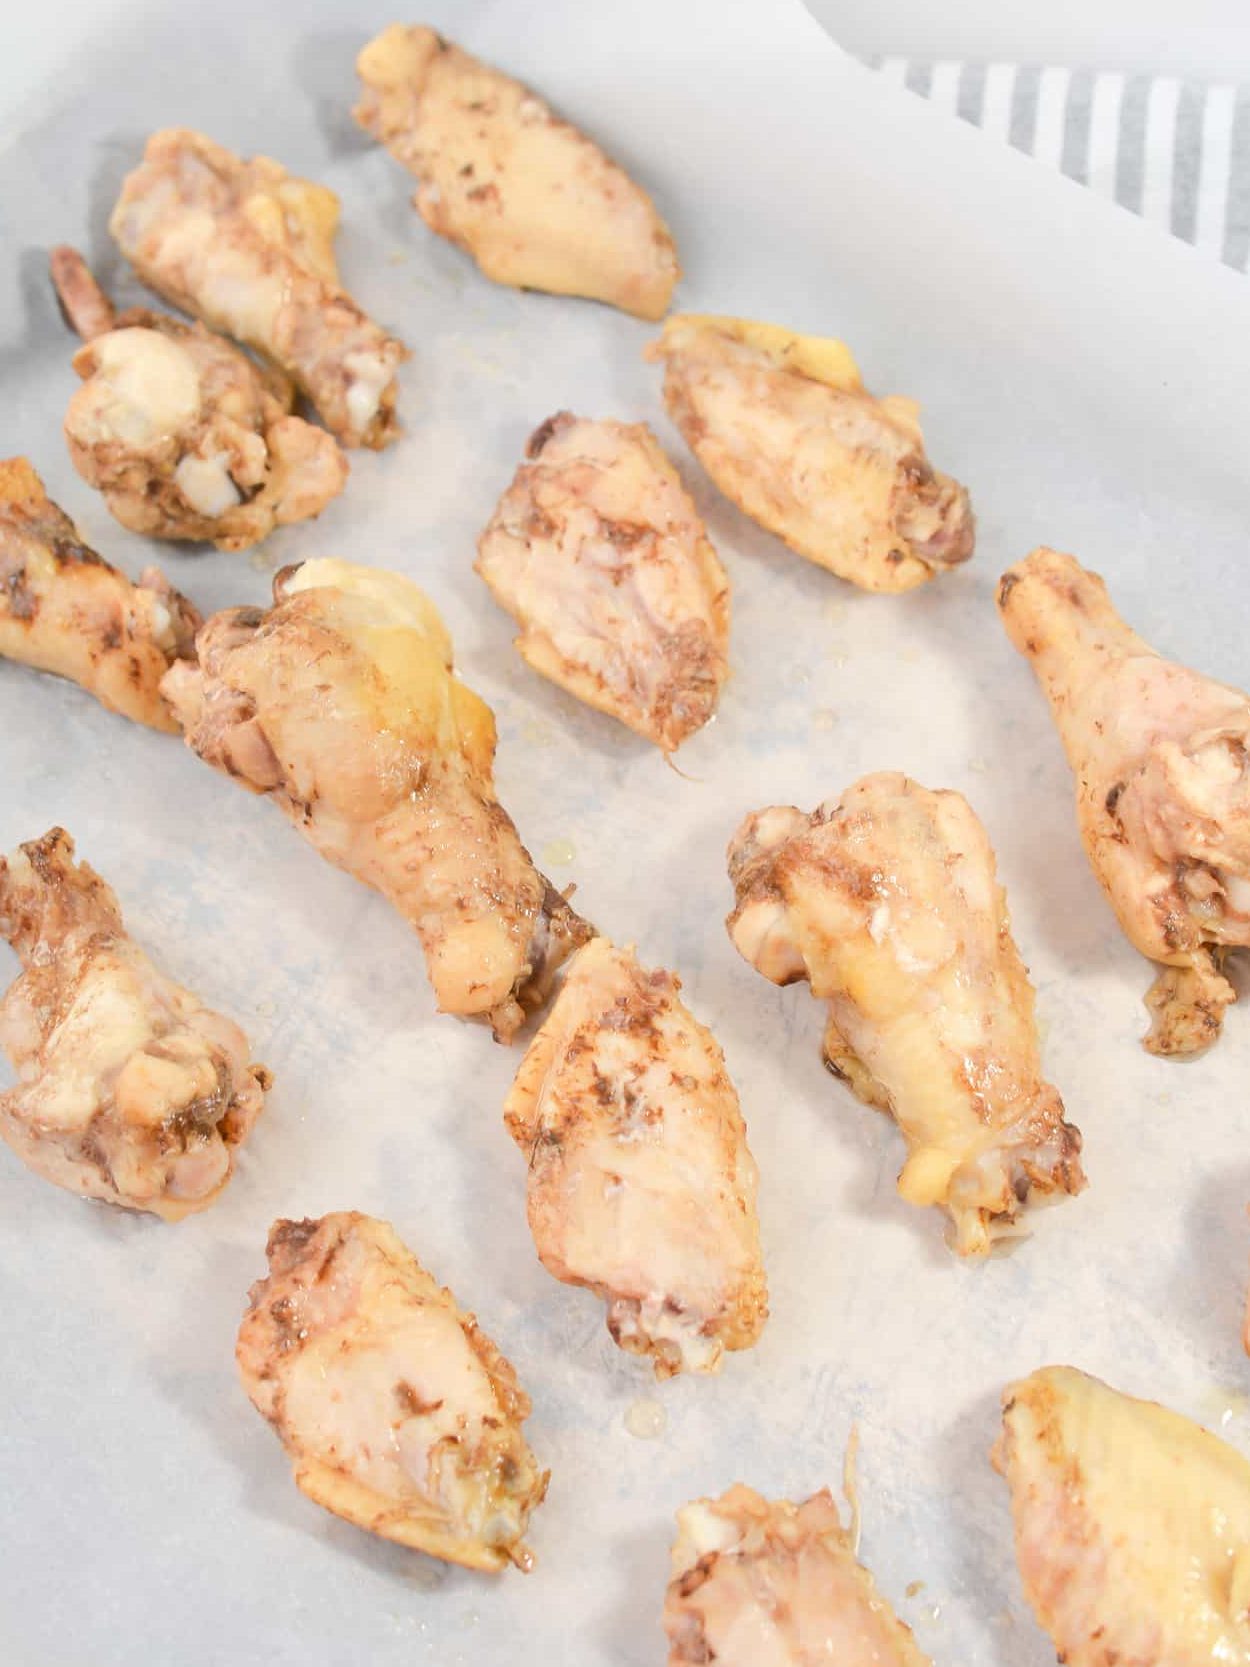 Remove the chicken wings and place them onto a baking sheet.